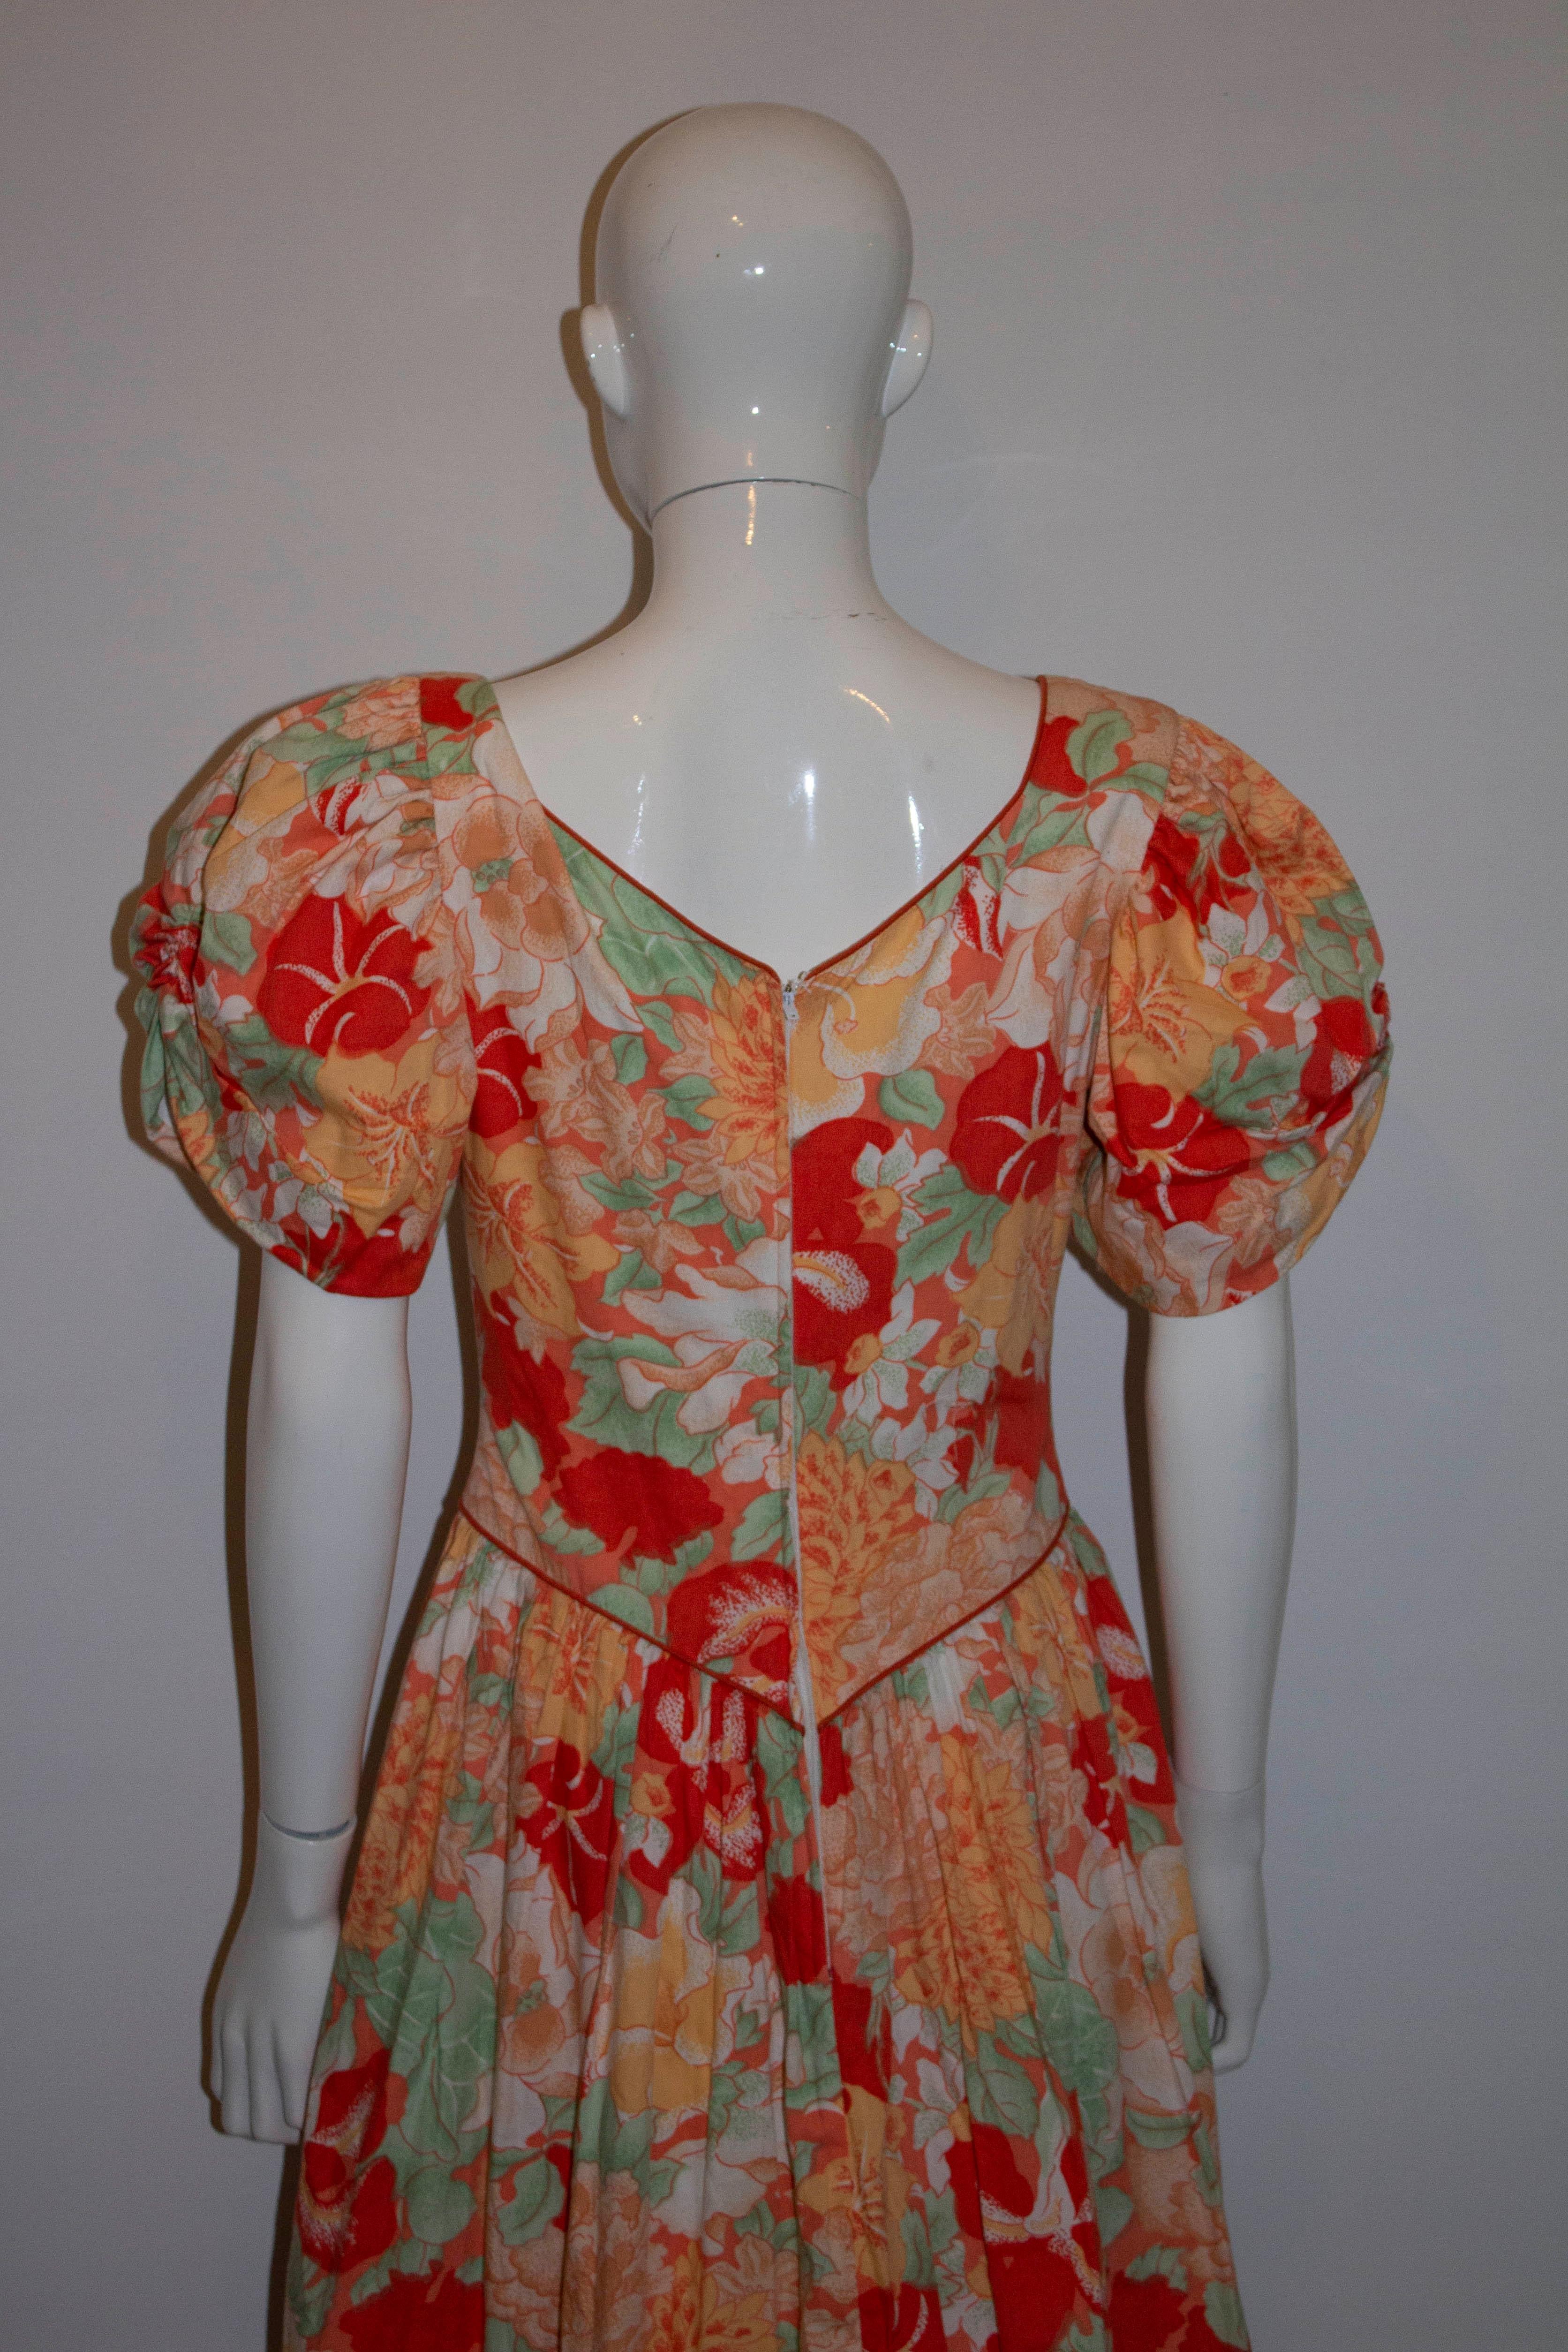 A wonderful vintage cotton floral gown in an orange, red and green mix. The dress has puff sleaves and a sweet heart neckline with central back zip.  It is lined in cotton and has a gathered skirt  with net underneath. 
Measurements: Bust 35'',